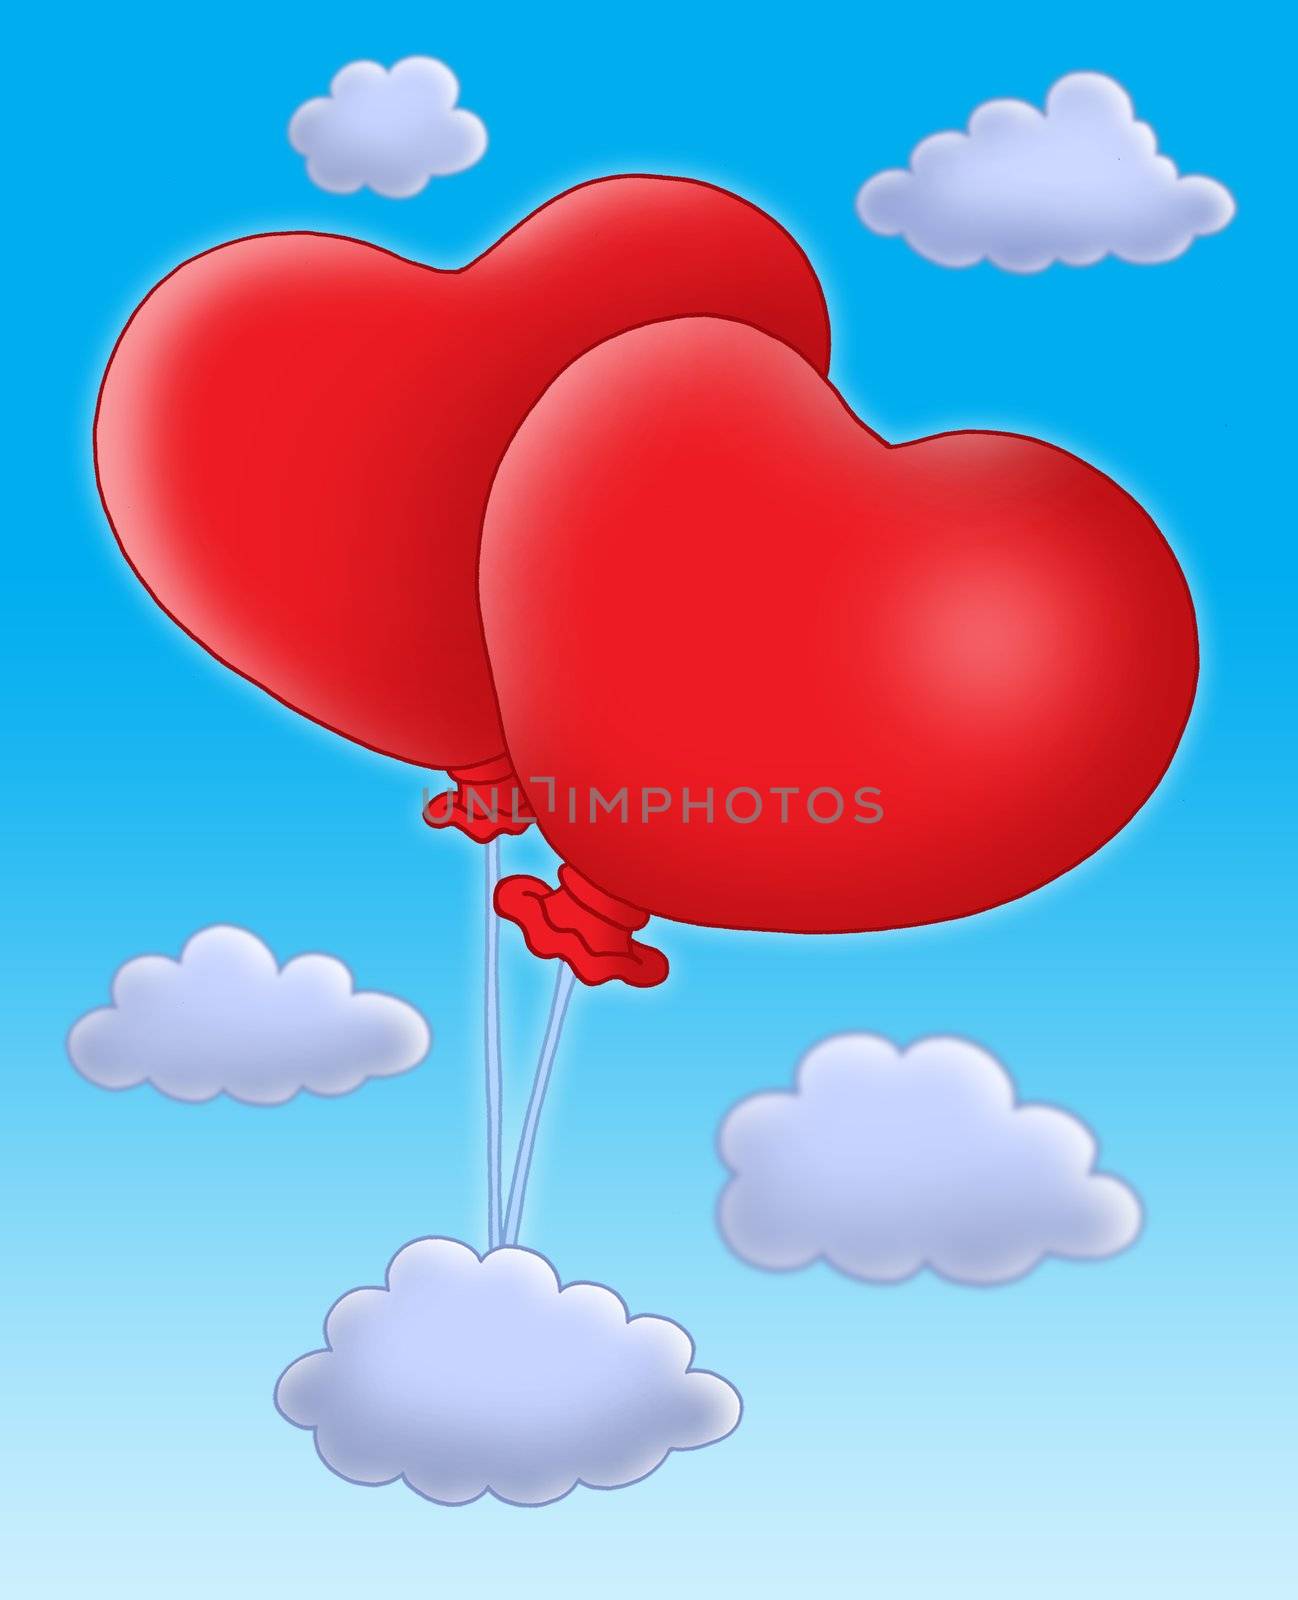 Hearts balloons on blue sky by clairev